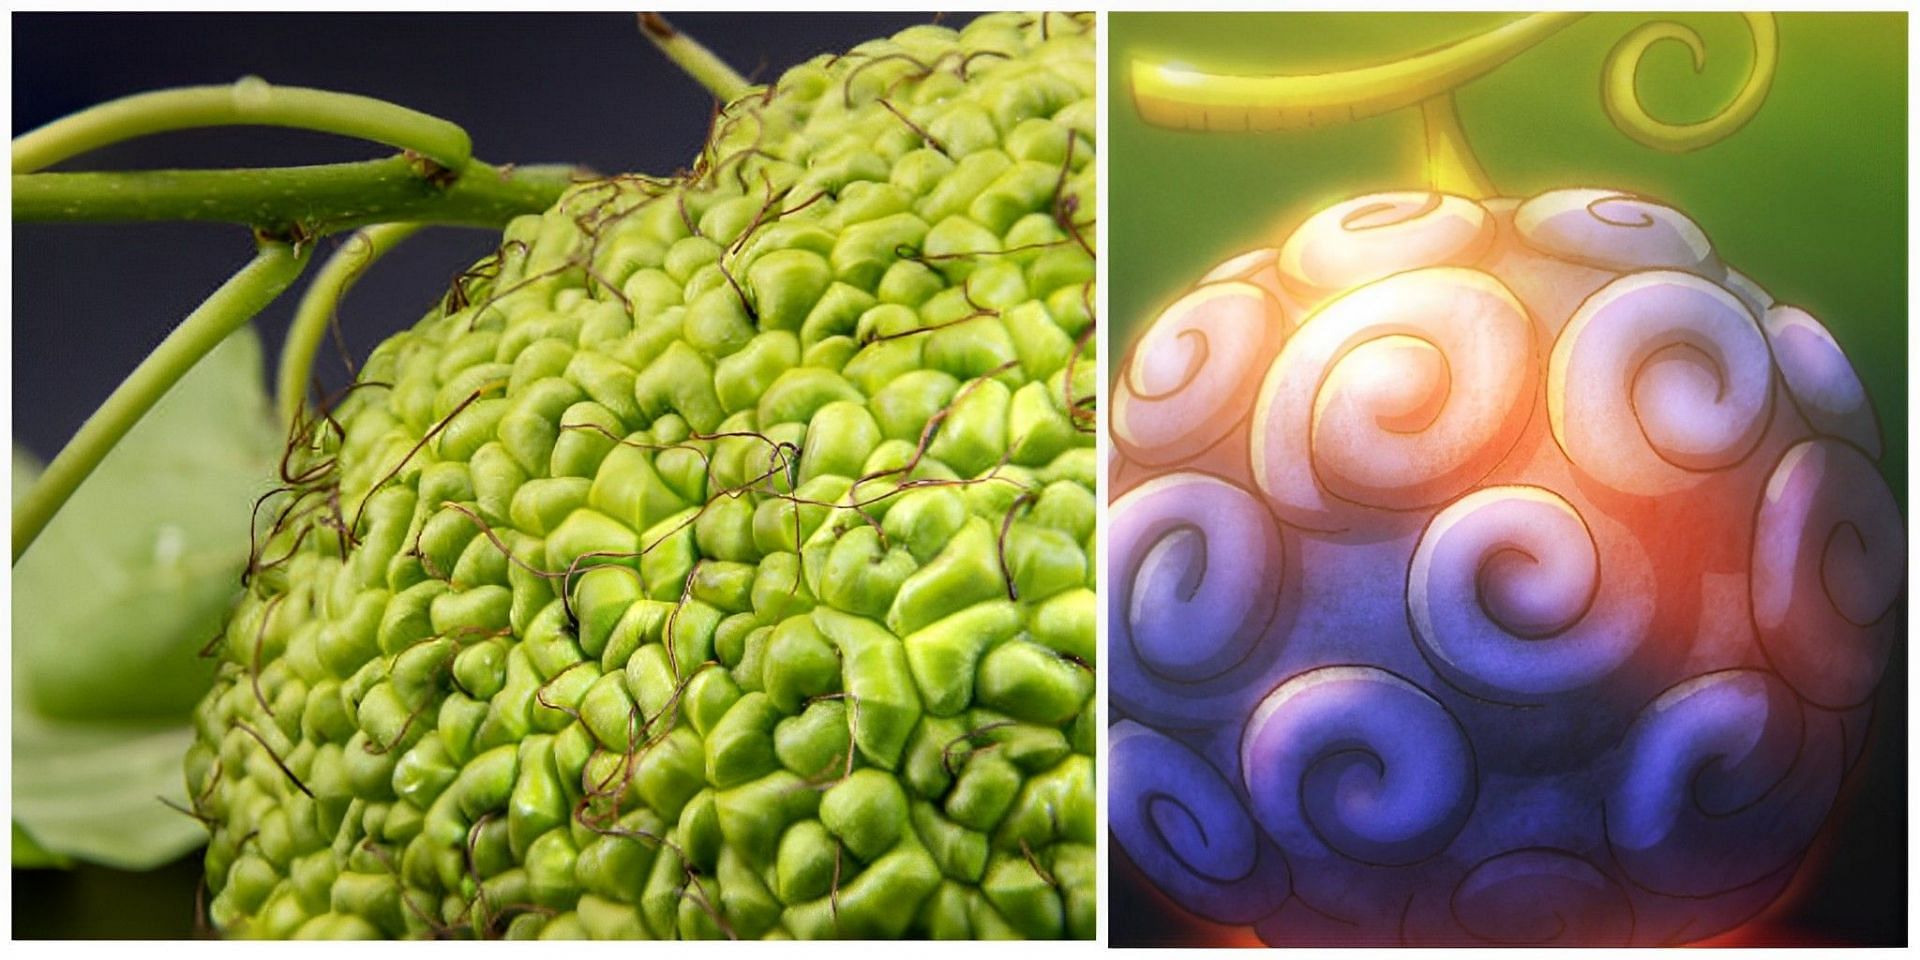 Weird fruit shares uncanny resemblance with Gum Gum Fruit from One Piece (Image sourced via Getty Images and Toei Animation Studio)